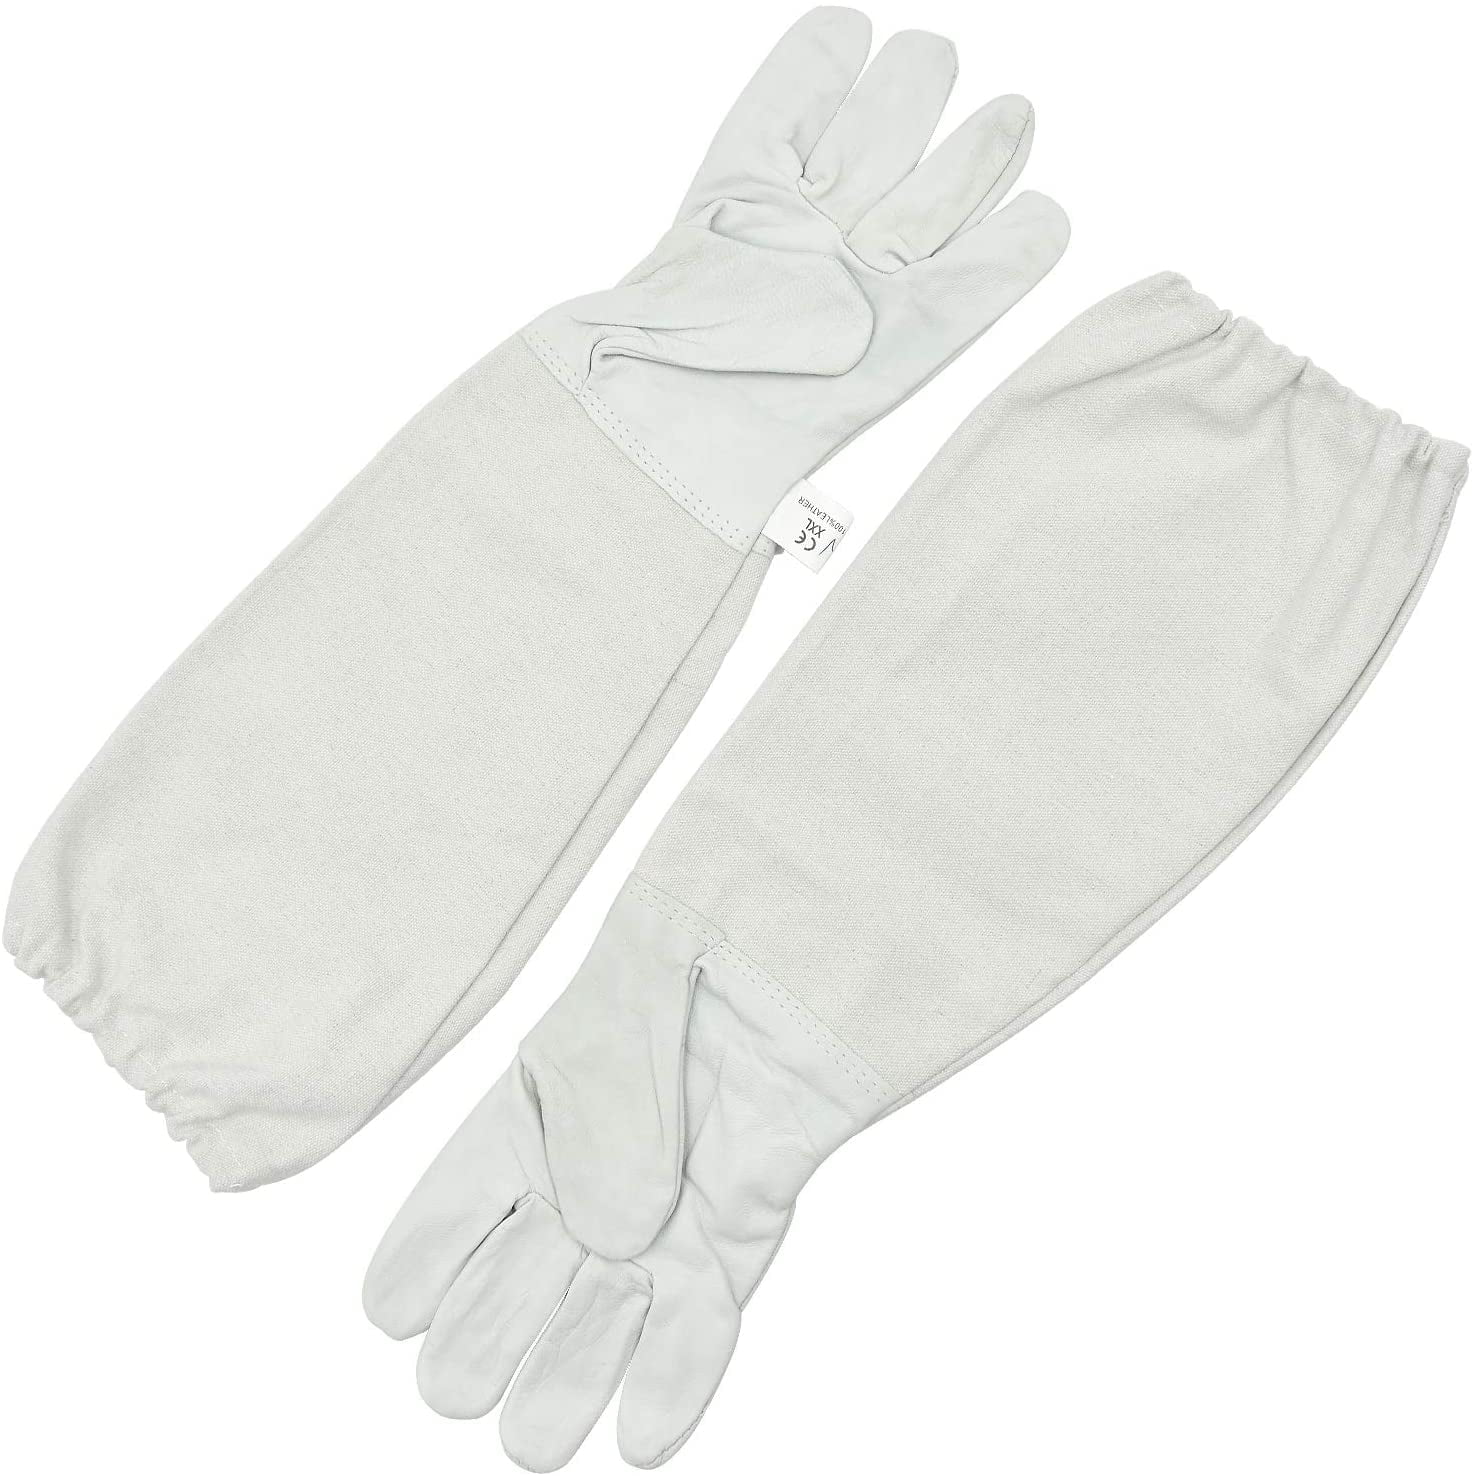 Beekeeper Bee Gloves Beekeeping gloves 100% Cotton & Goat skin leather SMALL 